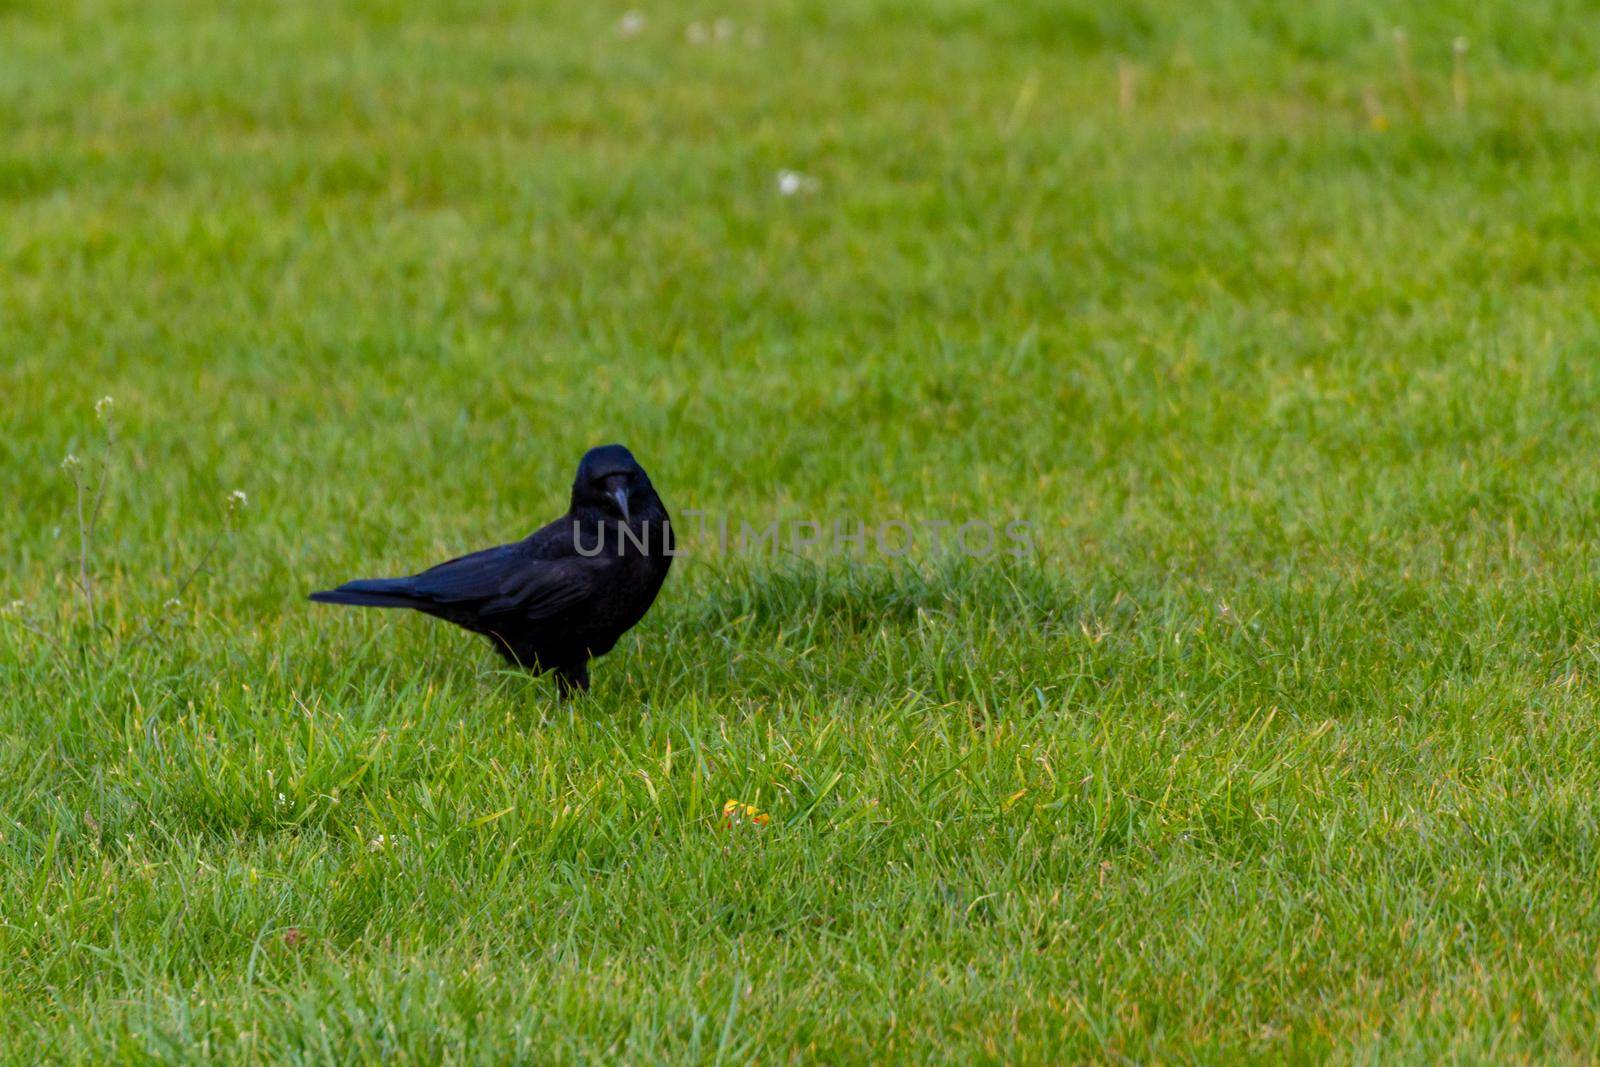 A Black Crow Standing On A Lawn by AlbertoPascual